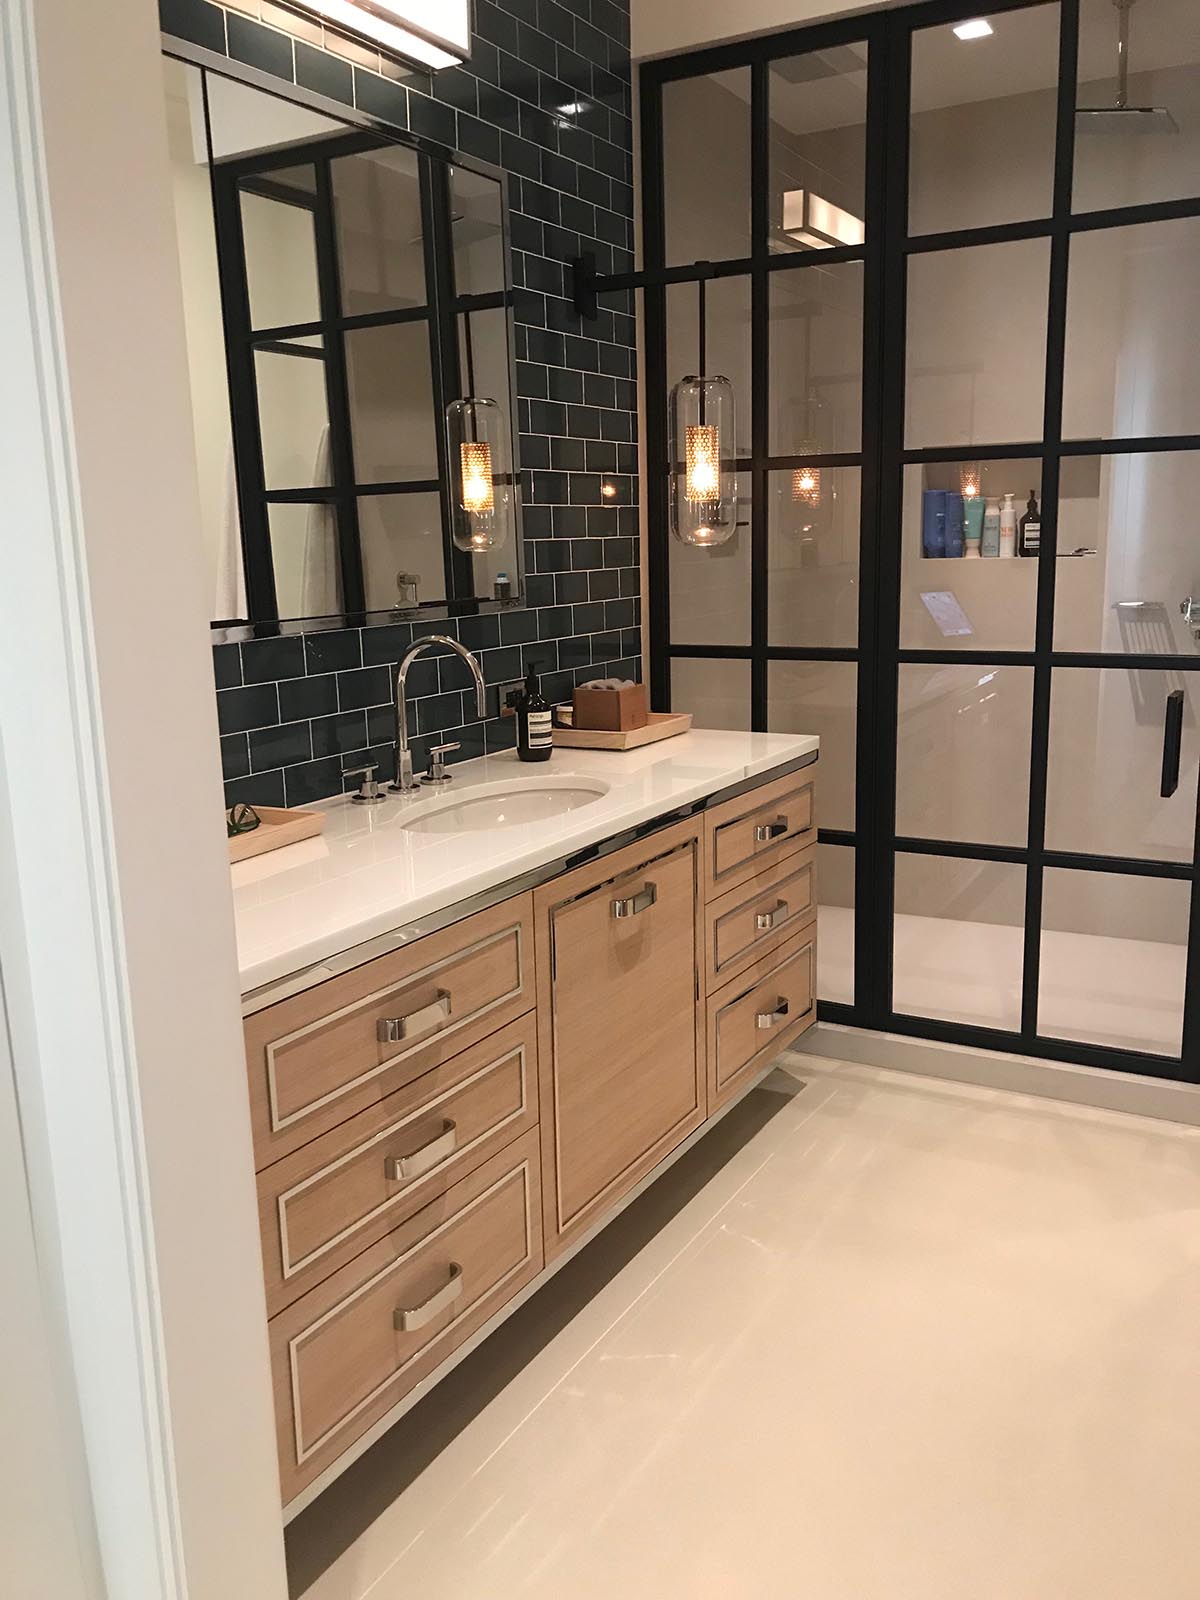 https://www.candlewoodvalleybuilding.com/wp-content/uploads/2020/02/Candlewood-Valley-Building_Bathroom-Cabinets_NYC.Vanity.001-1.jpg